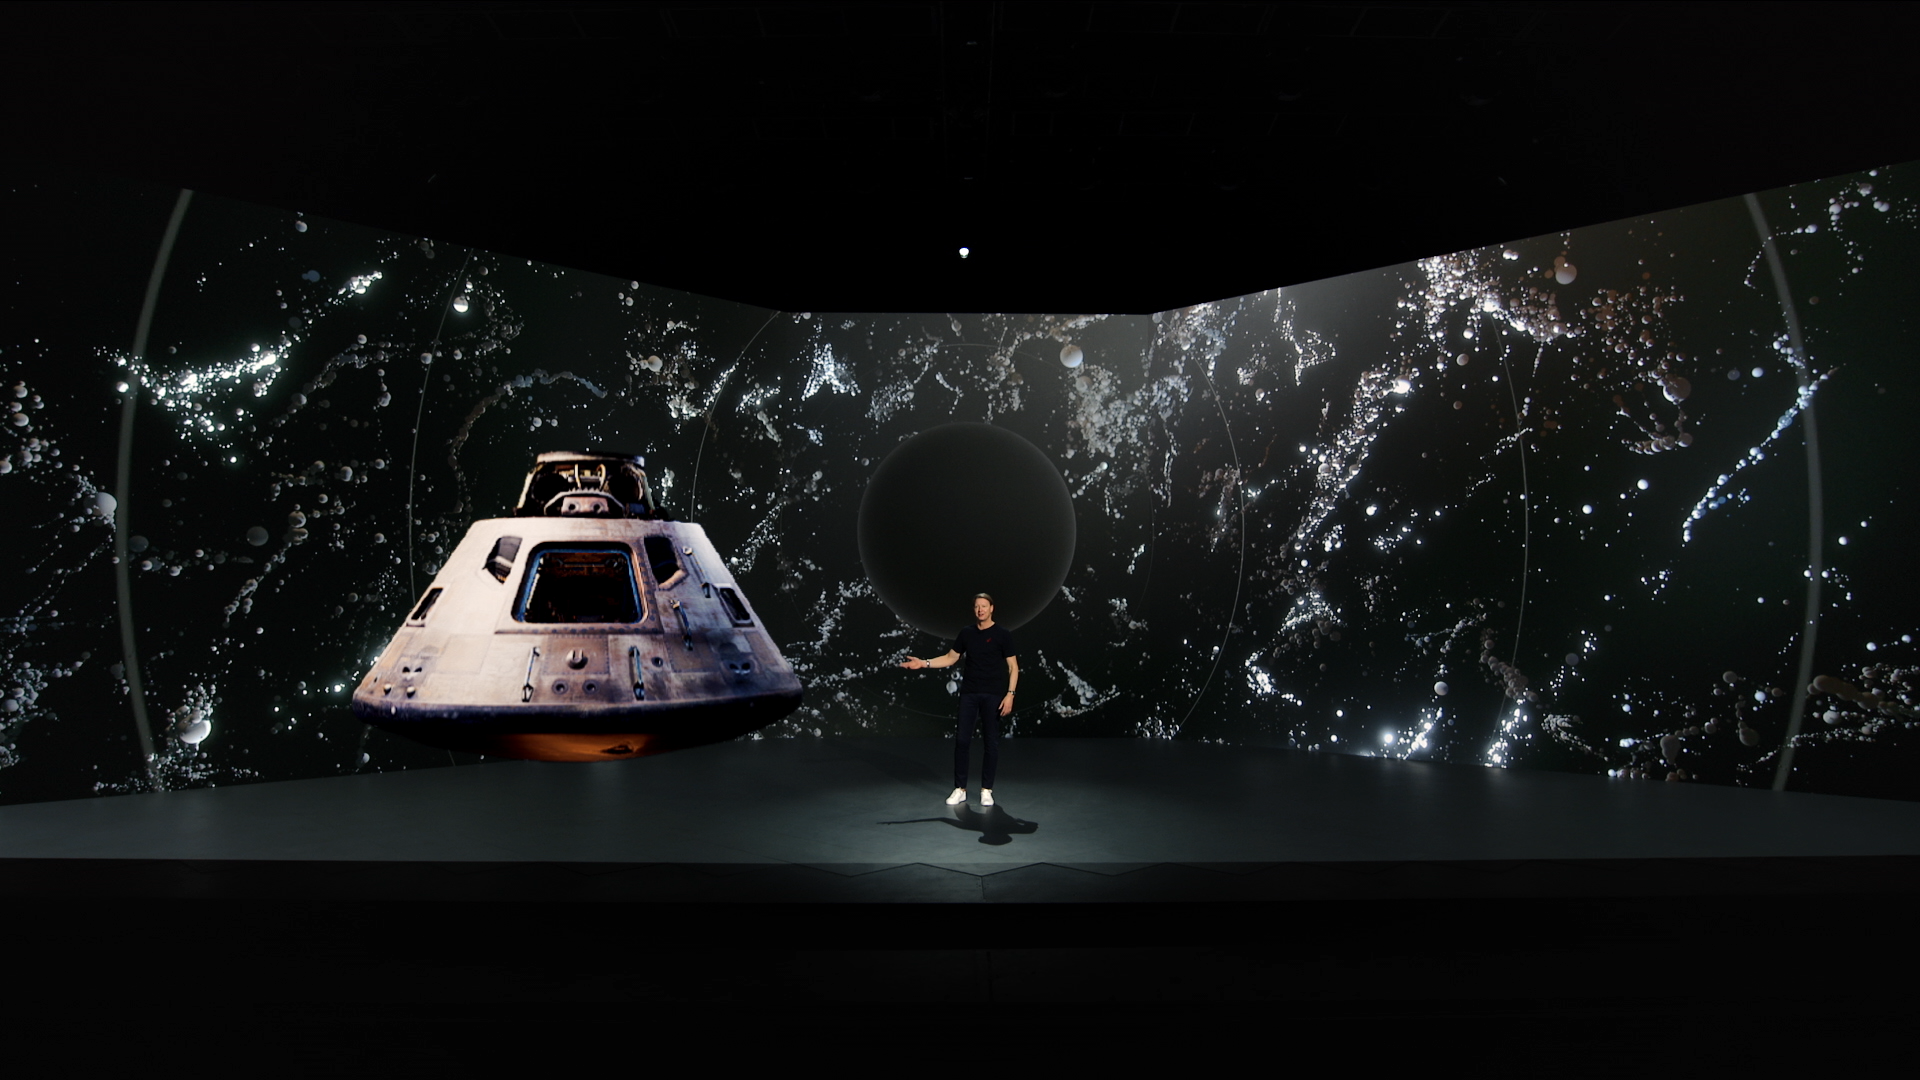 At Verizon’s keynote, CEO Hans Vestberg said 5G isn’t just a super-fast network – it’s a platform for future innovation. The company is expanding its relationship with the Smithsonian to provide high-fidelity scanning of artifacts, such as the Apollo 11 landing module, leading to new digital experiences. Credit: Verizon